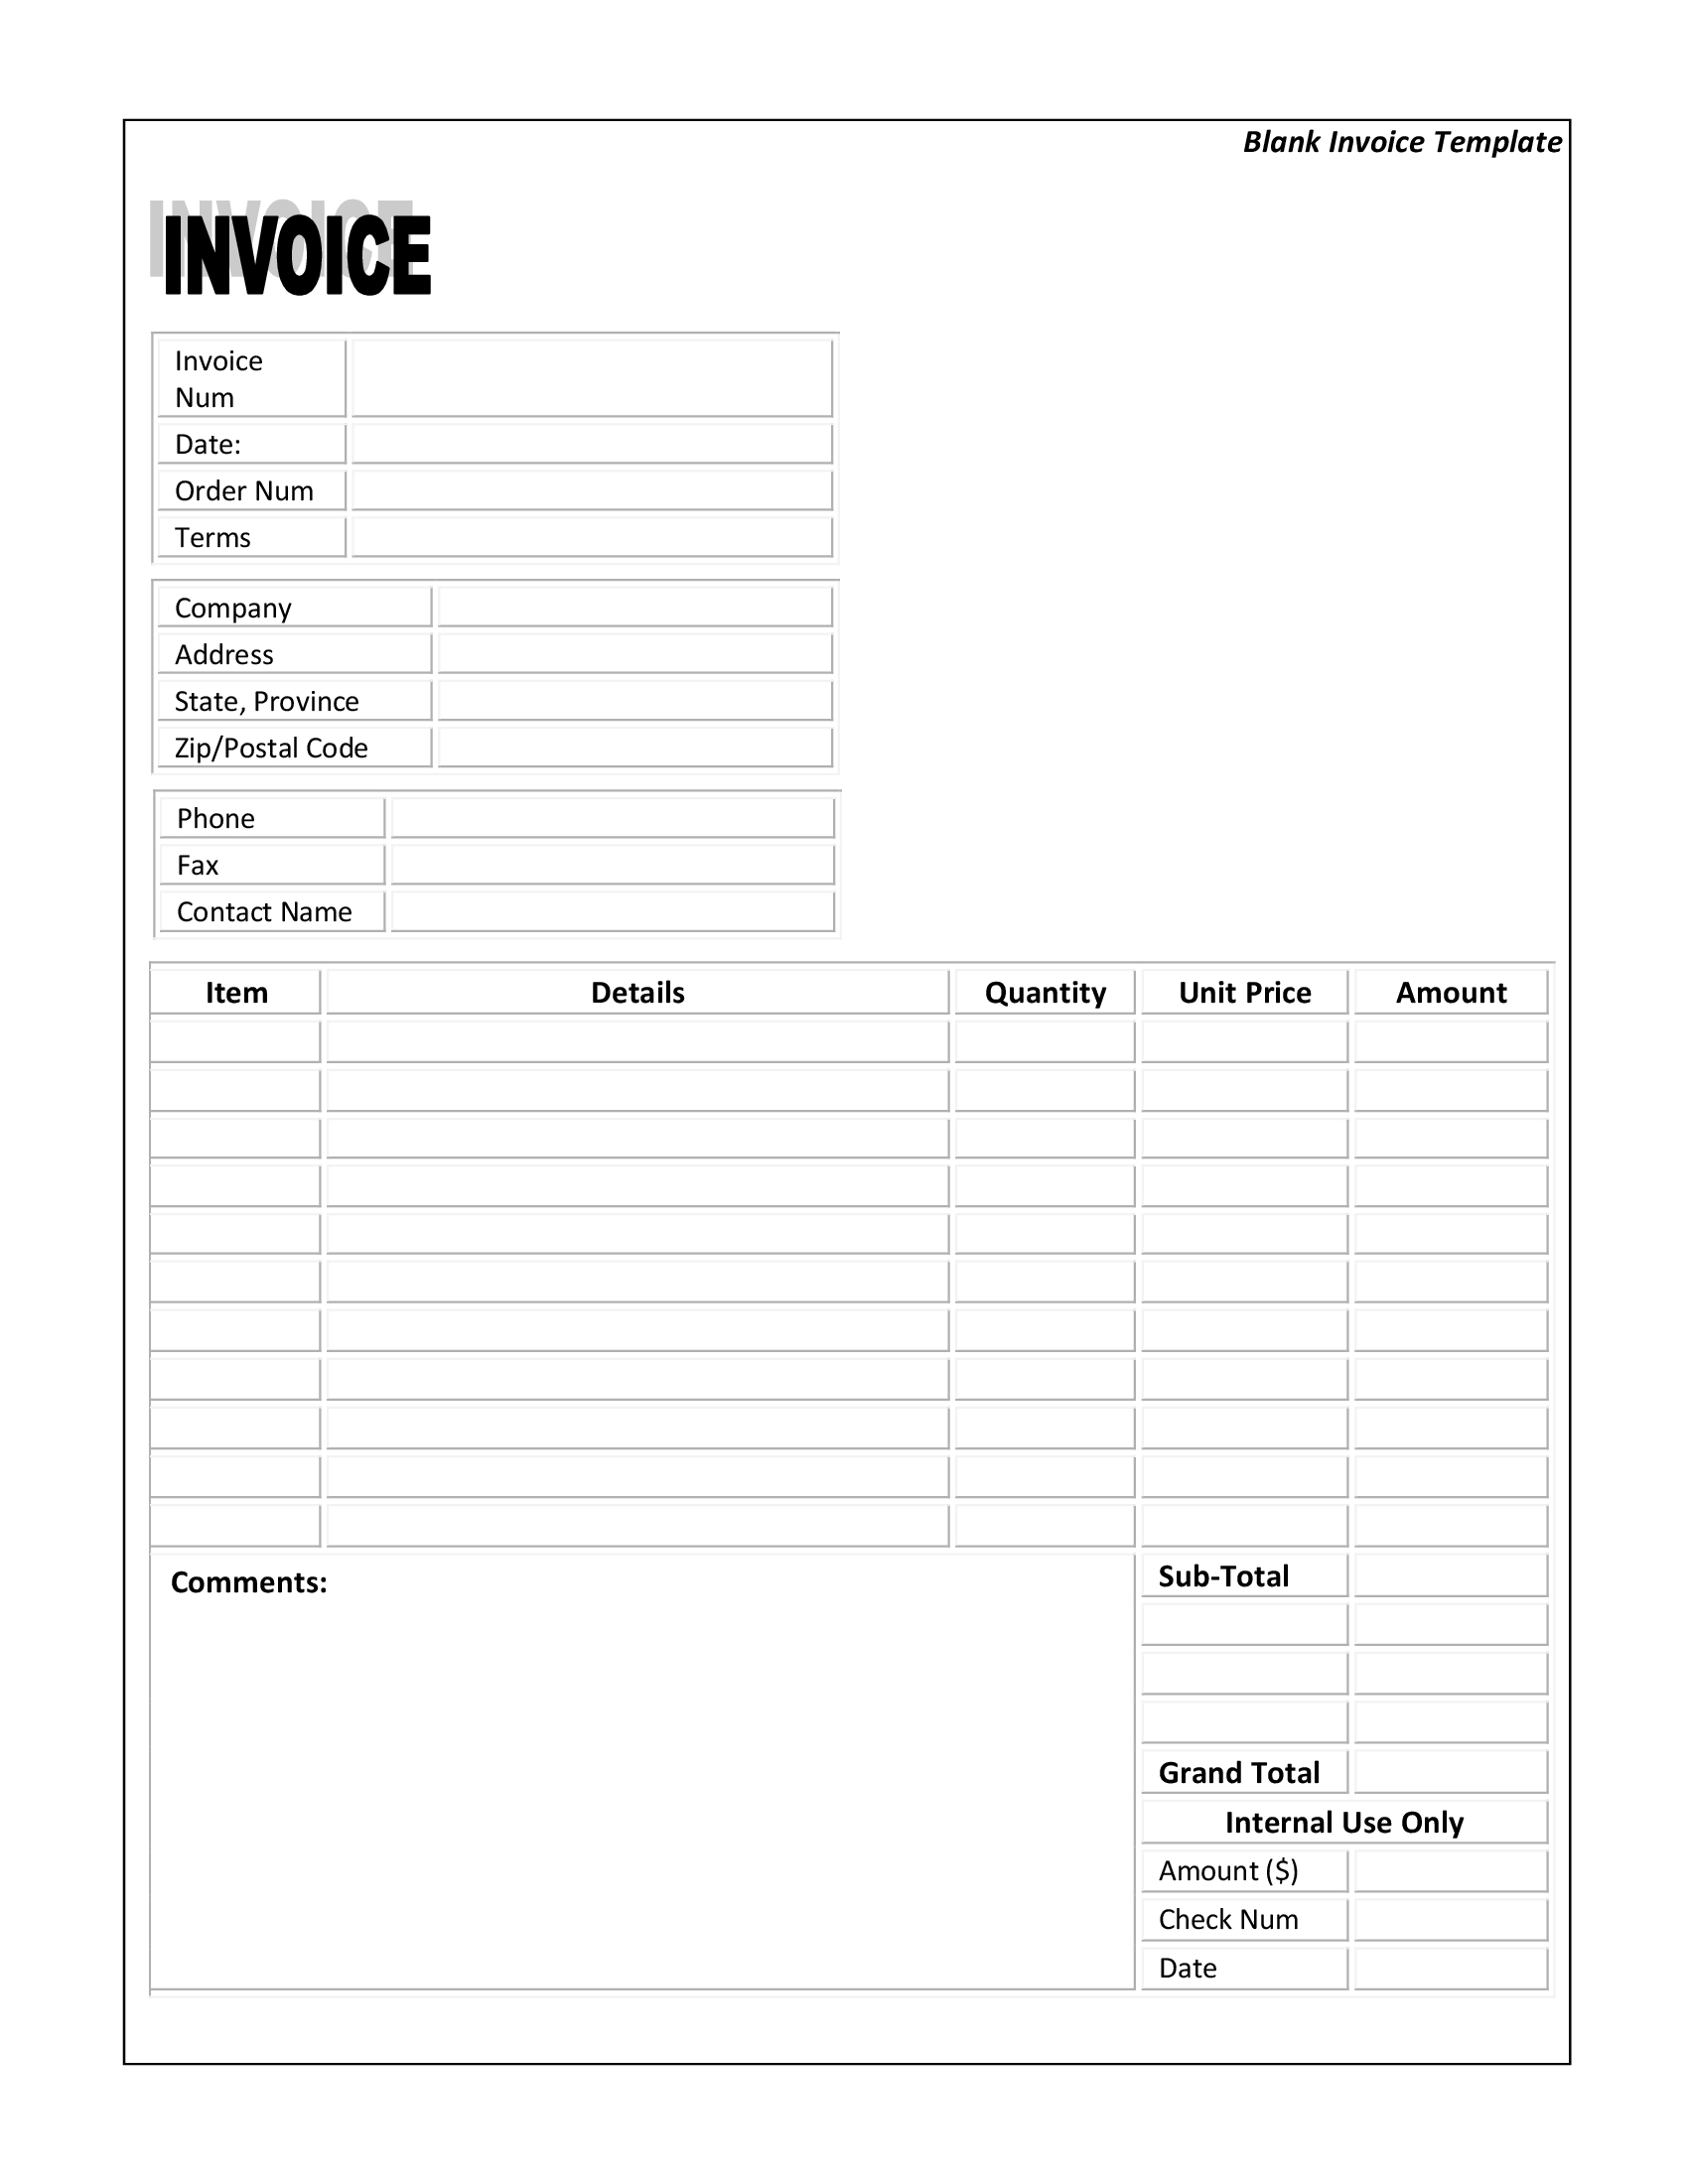 customizable and editable blank invoice example